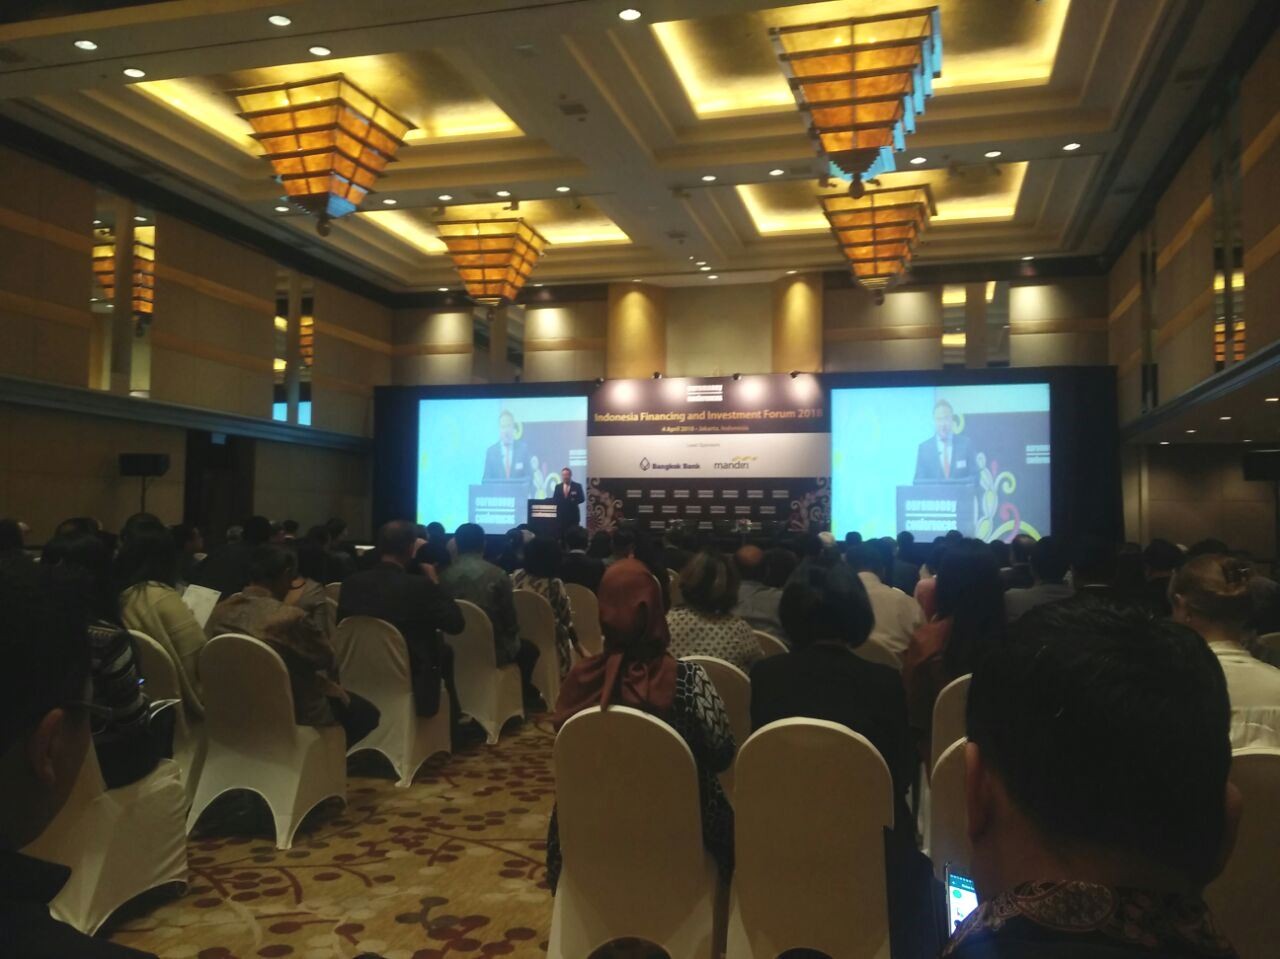 EIBN Supported the Euromoney Indonesia Financing and Investment Forum